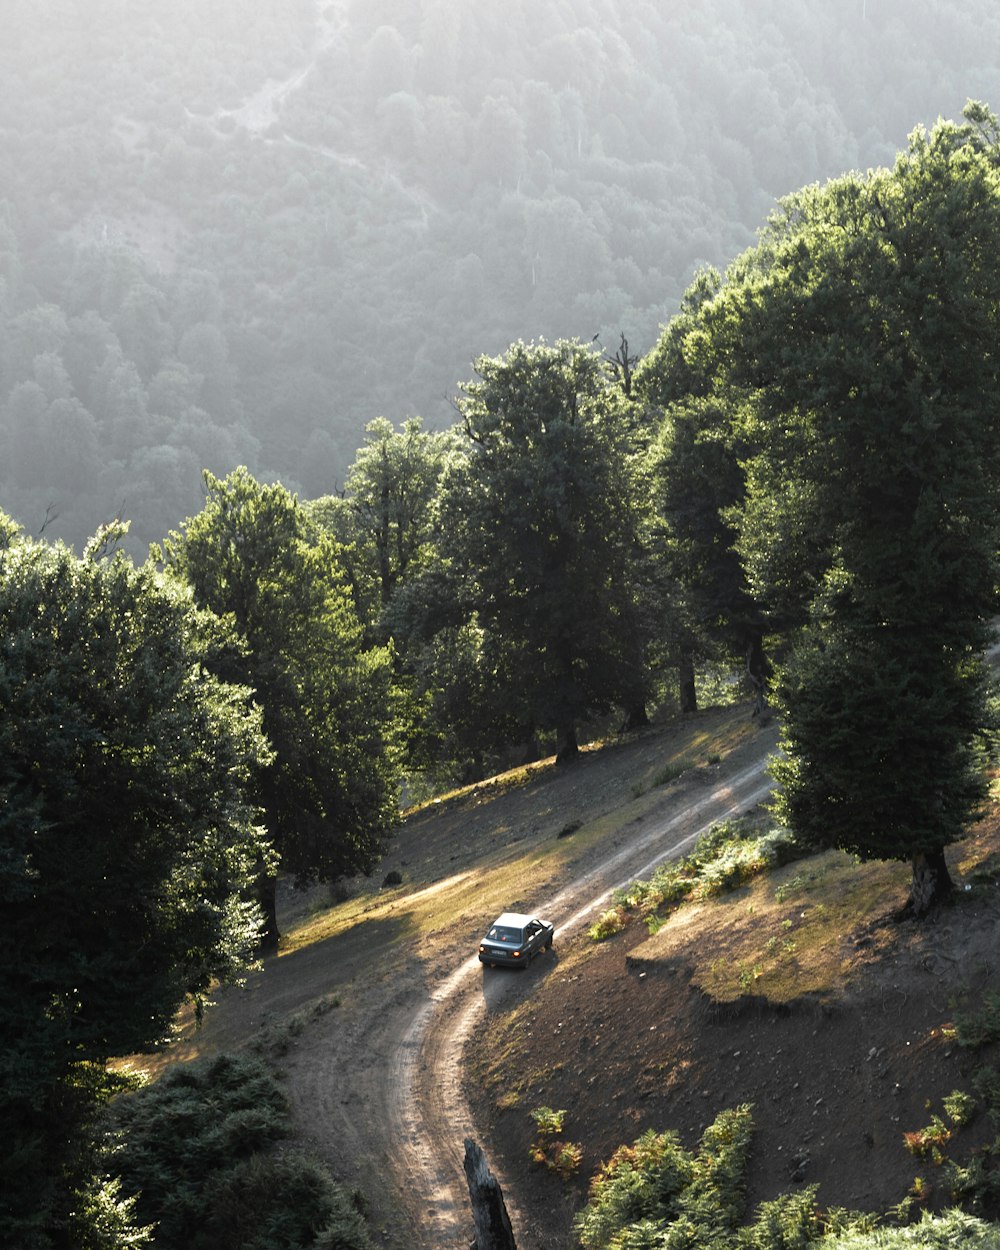 a car driving on a road surrounded by trees